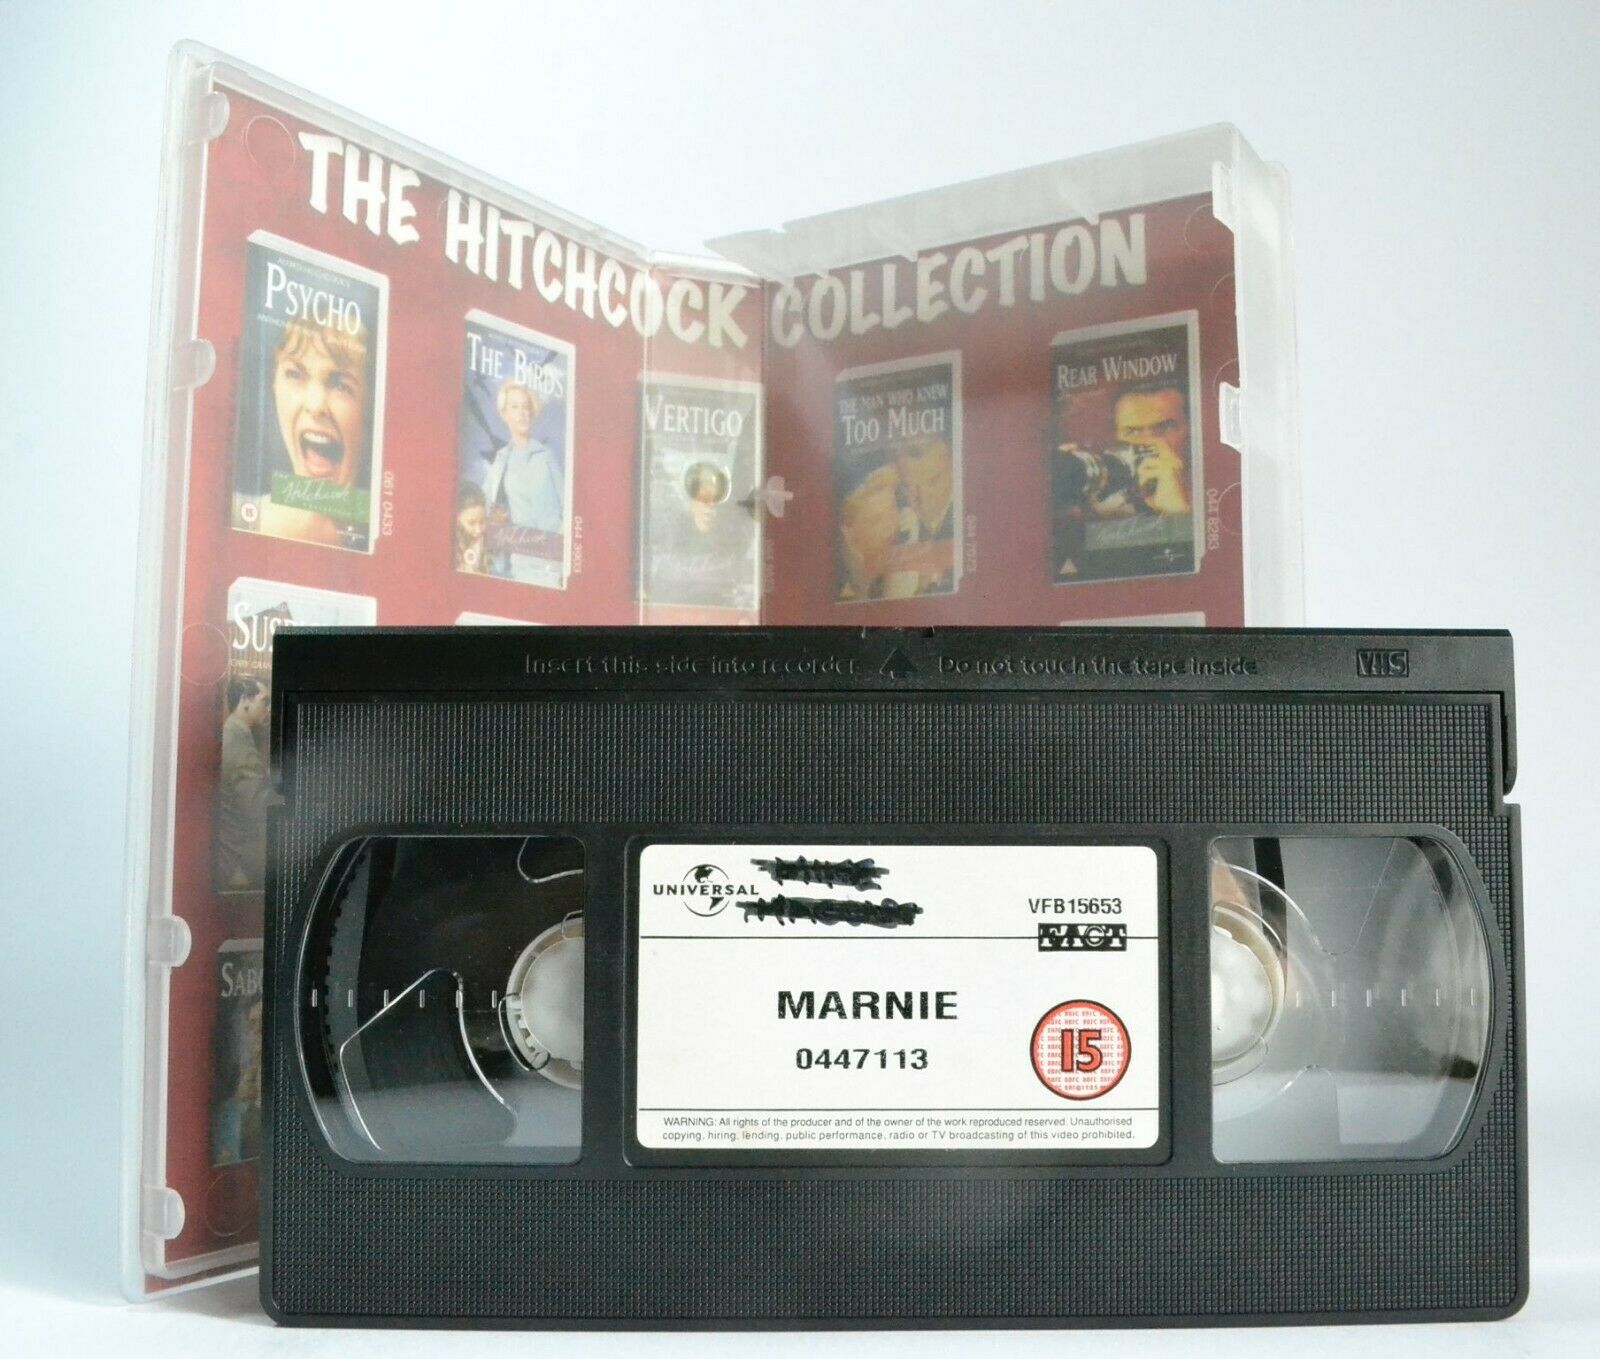 Marnie; [Alfred Hitchcock] Thriller (Digitally Mastered) Sean Connery - Pal VHS-